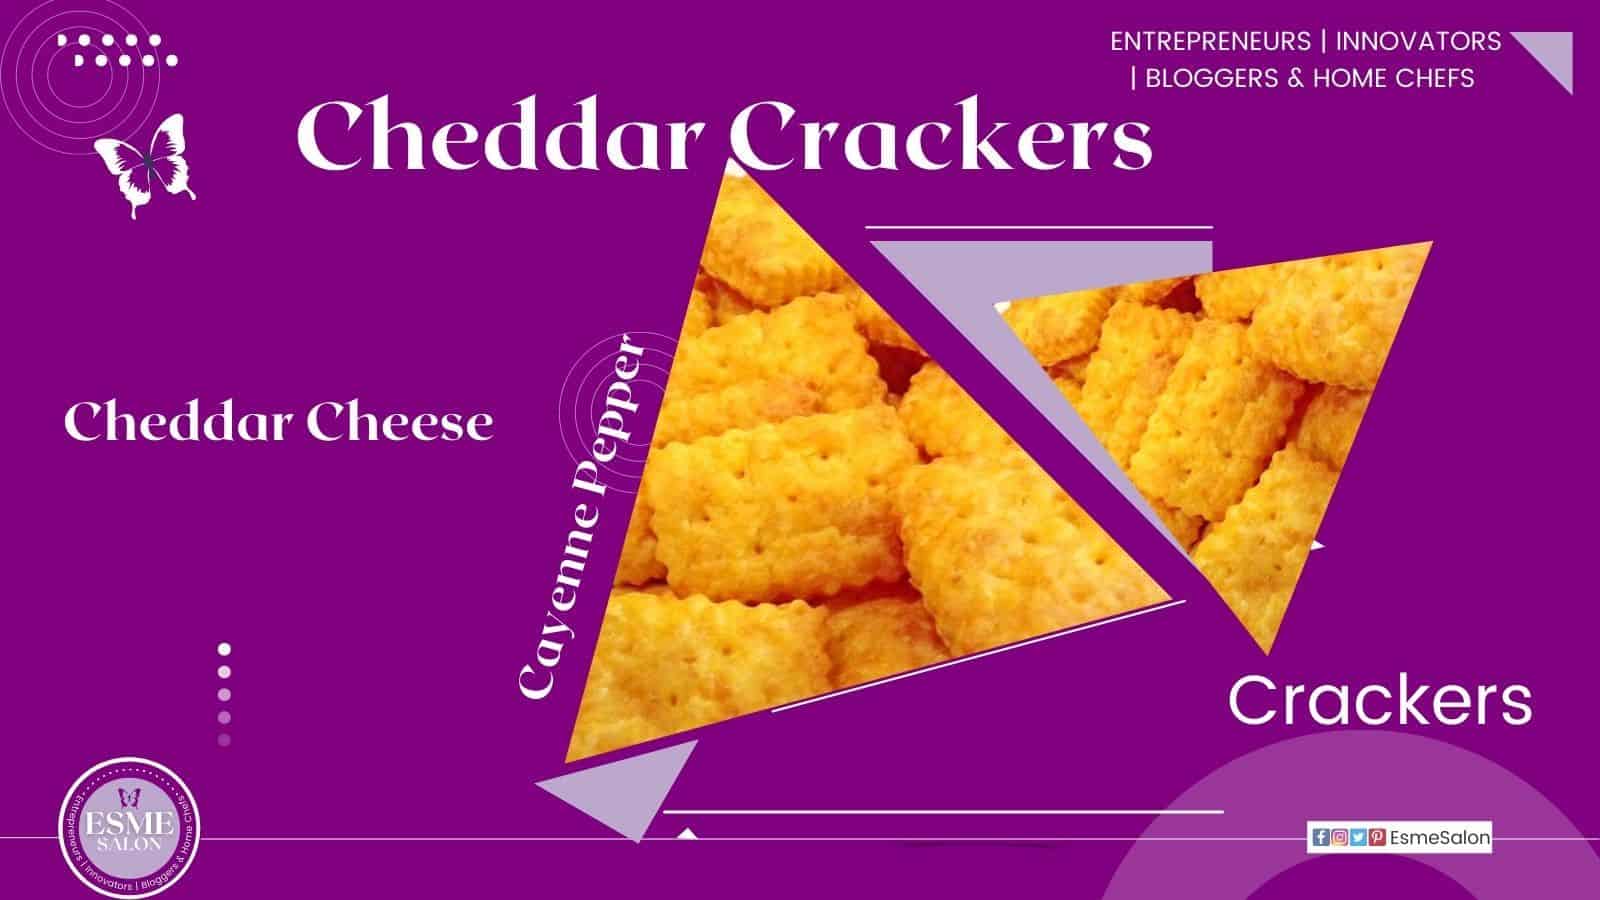 Cheddar Crackers, little pockets of lightness and better than store-bought